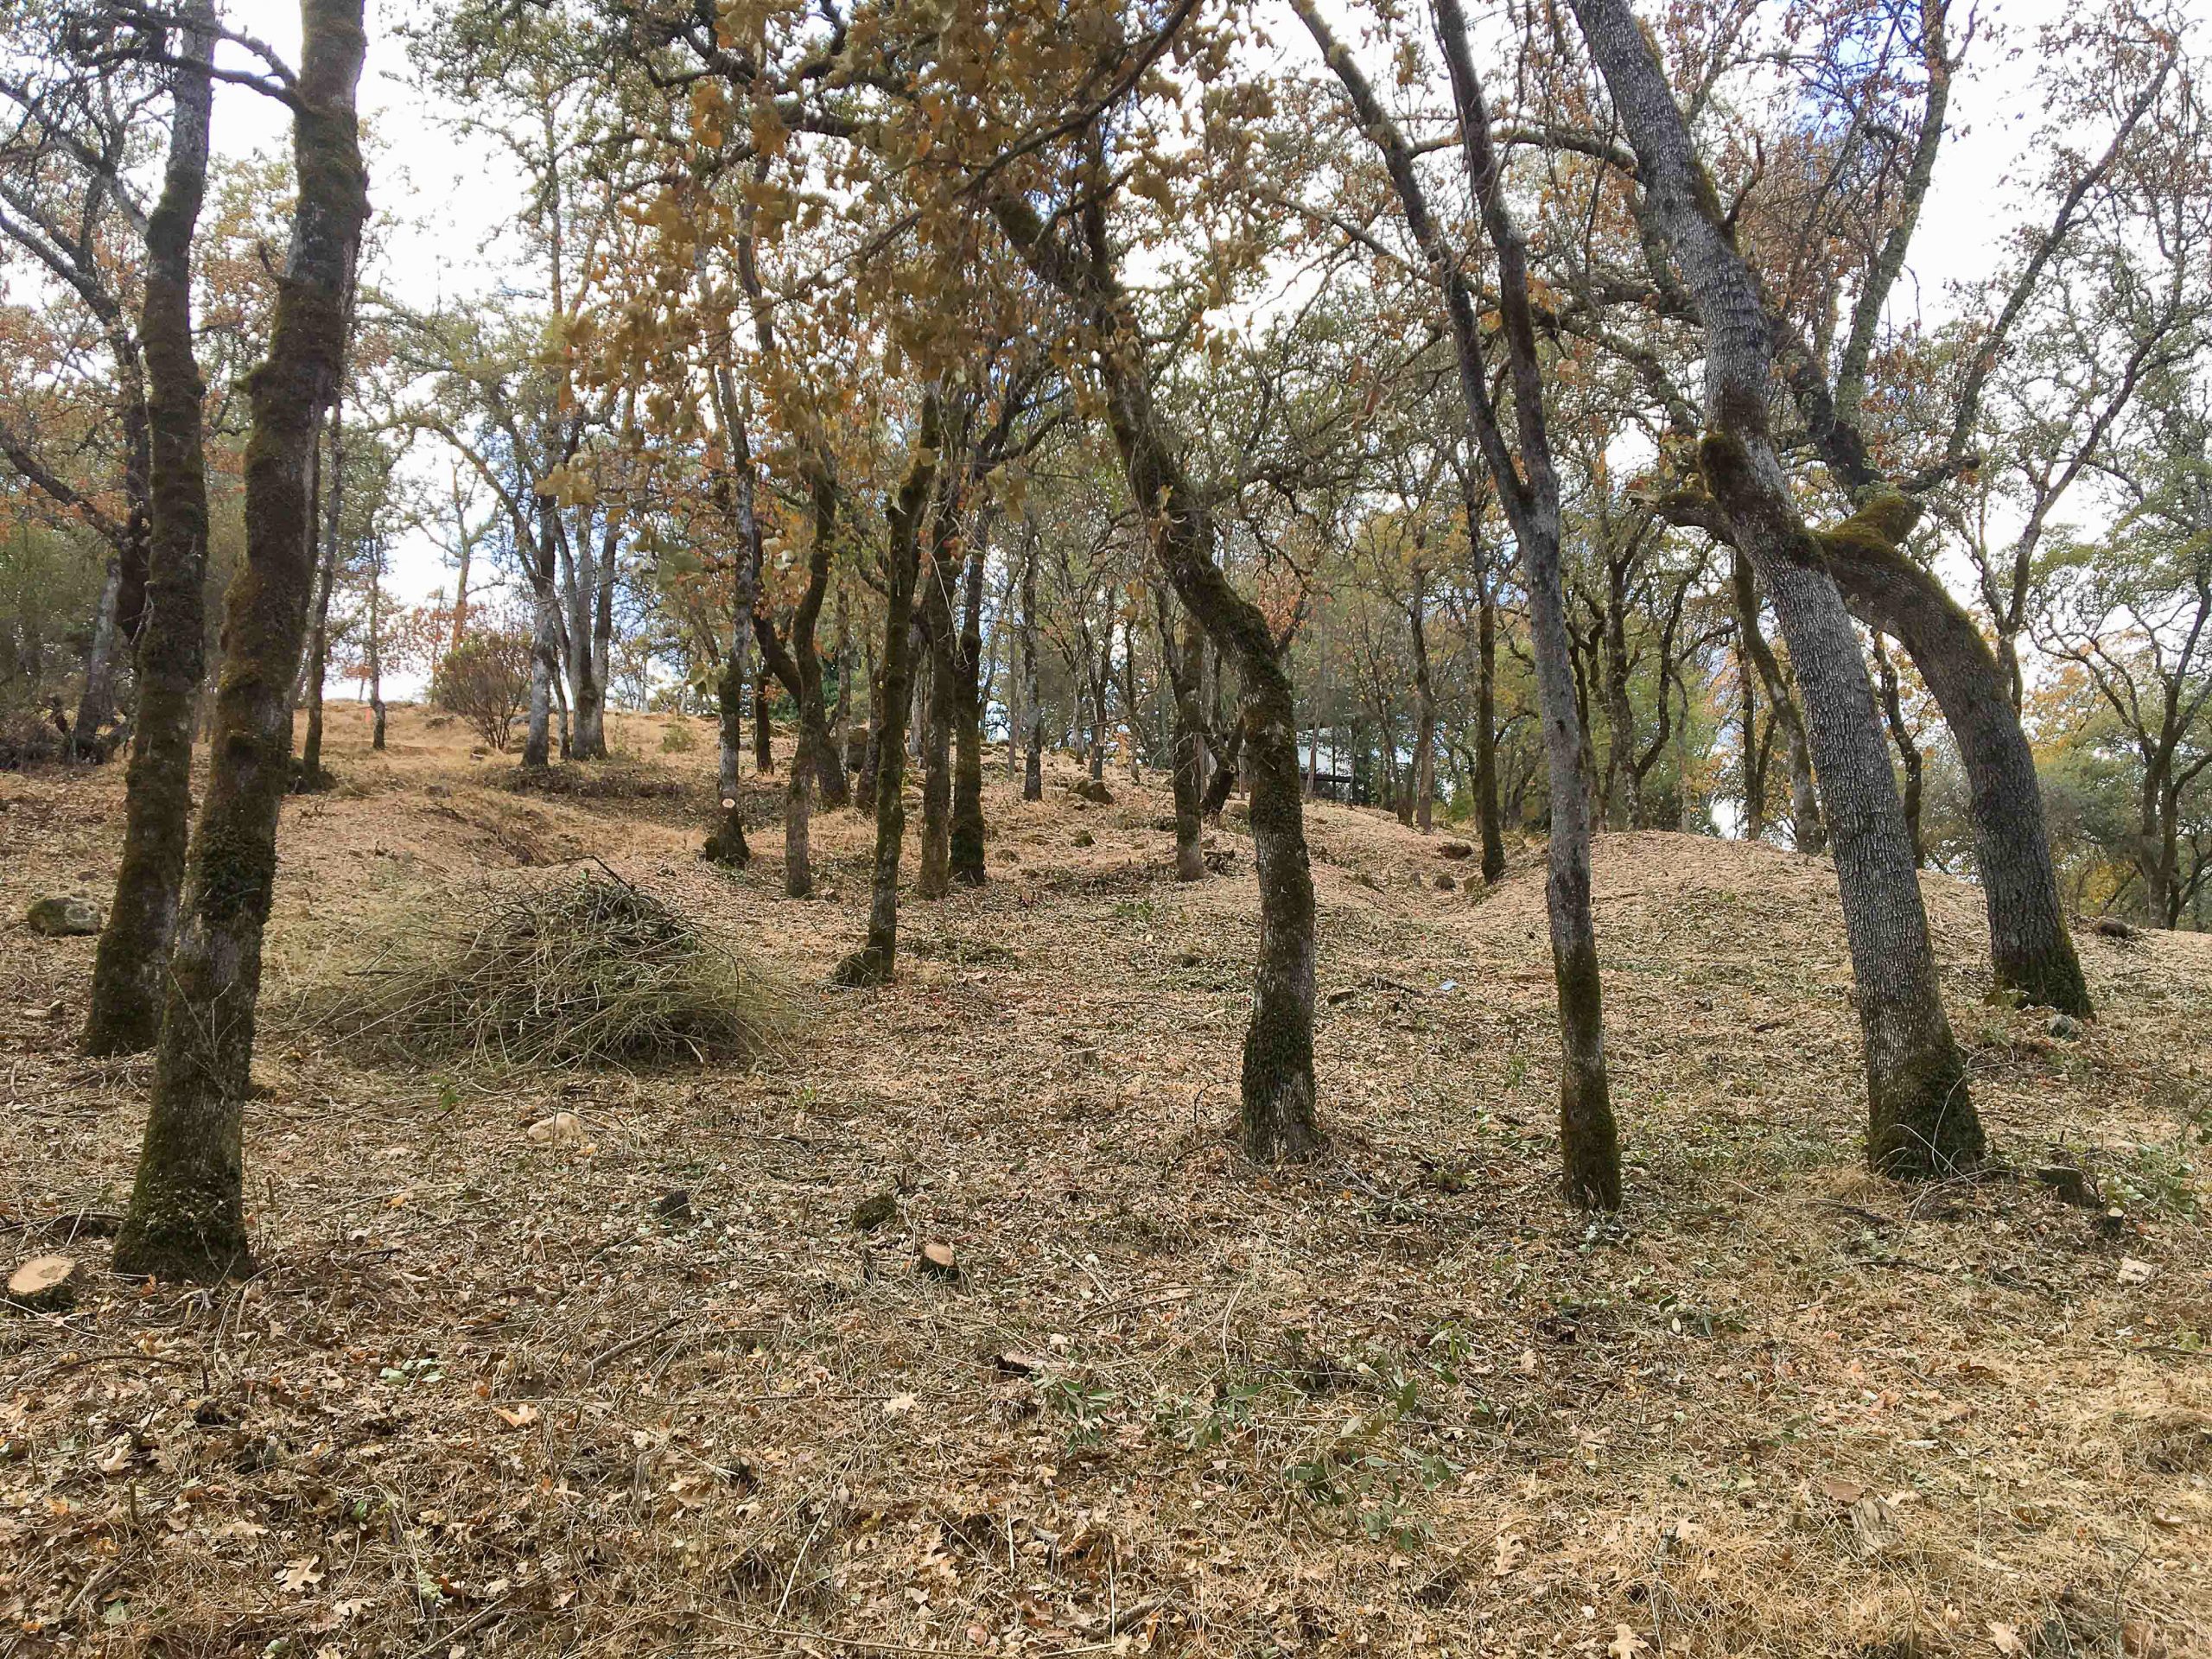 A forested area with piles of woody vegetation prepared for burning.